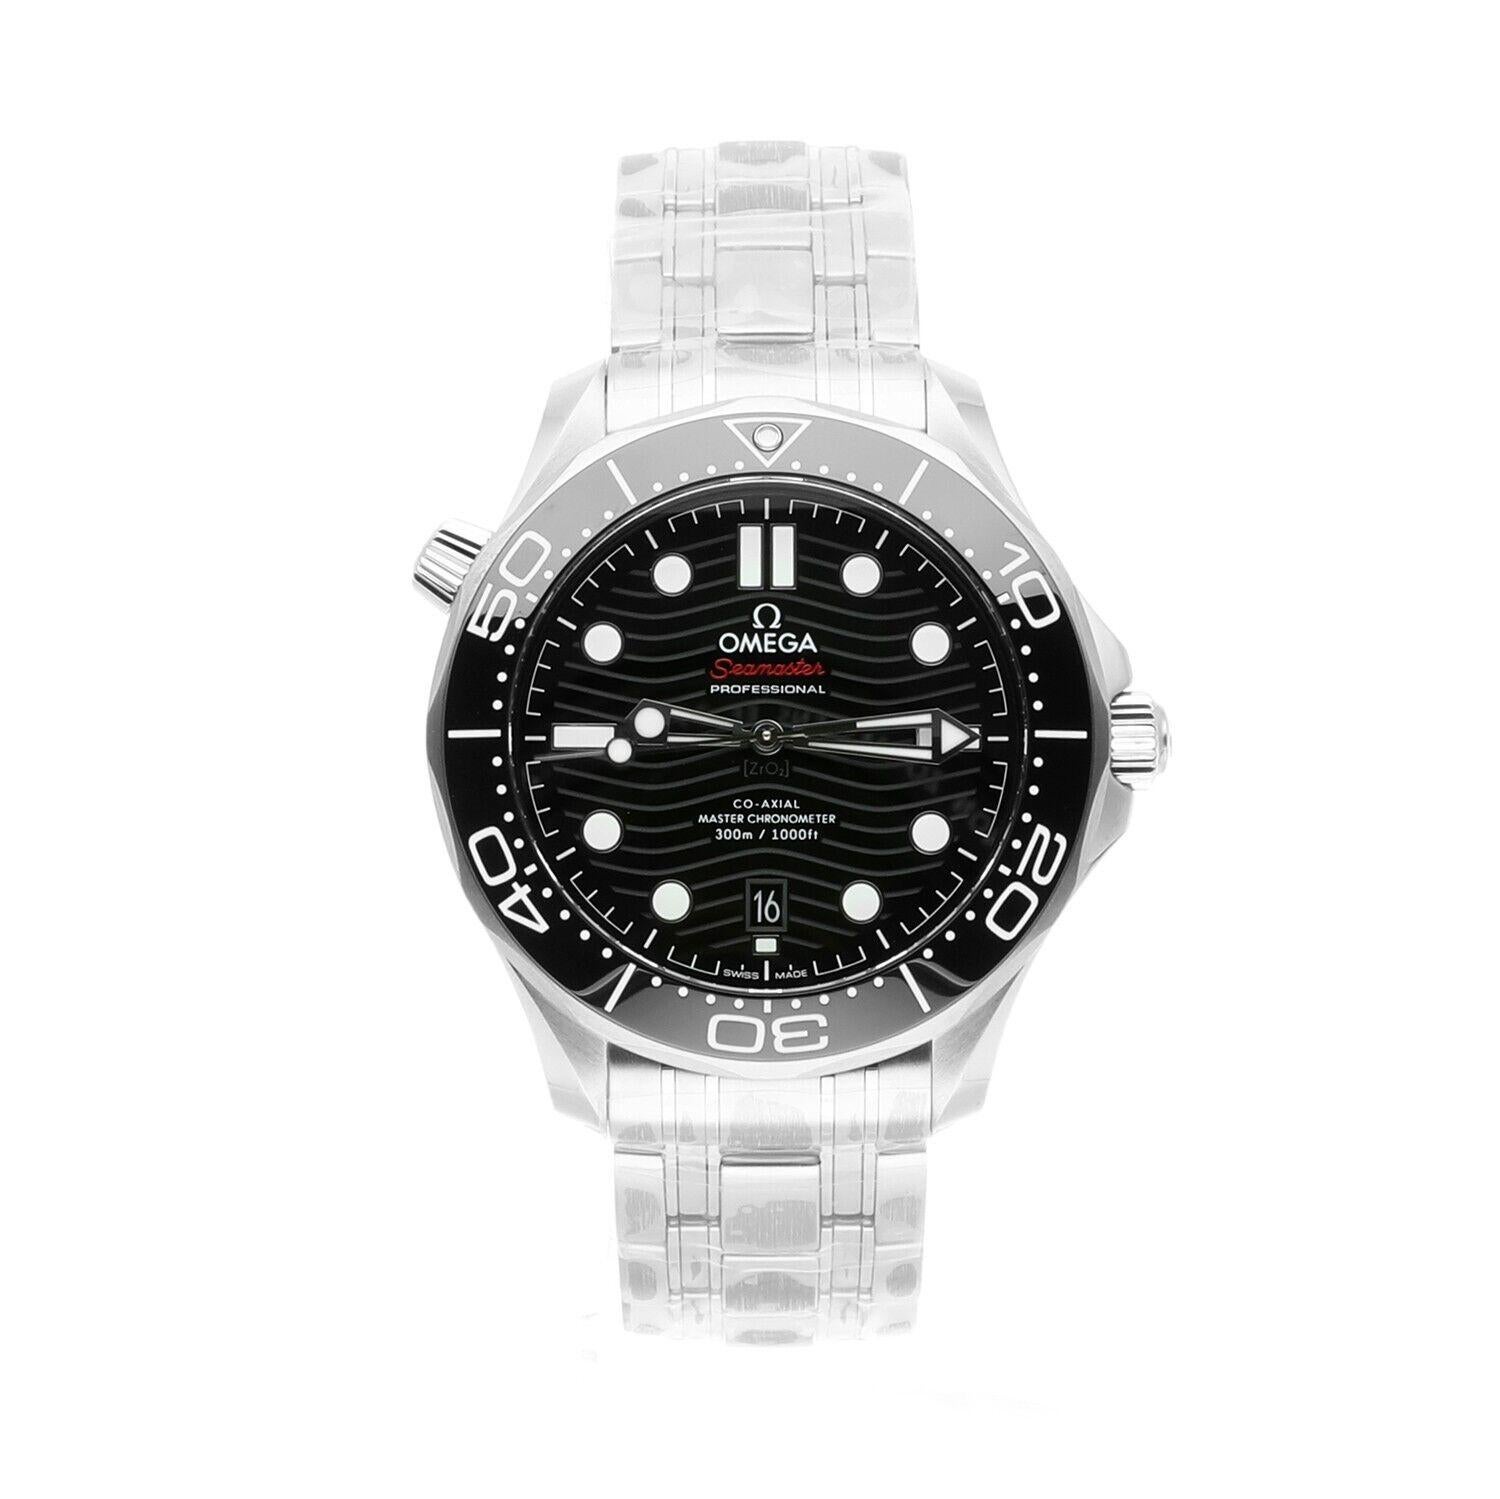 This 42 mm model is crafted from stainless steel and includes a black ceramic bezel with a white enamel diving scale. The dial is also polished black ceramic and features laser-engraved waves and a date window at 6 o’clock.
The skeleton hands and